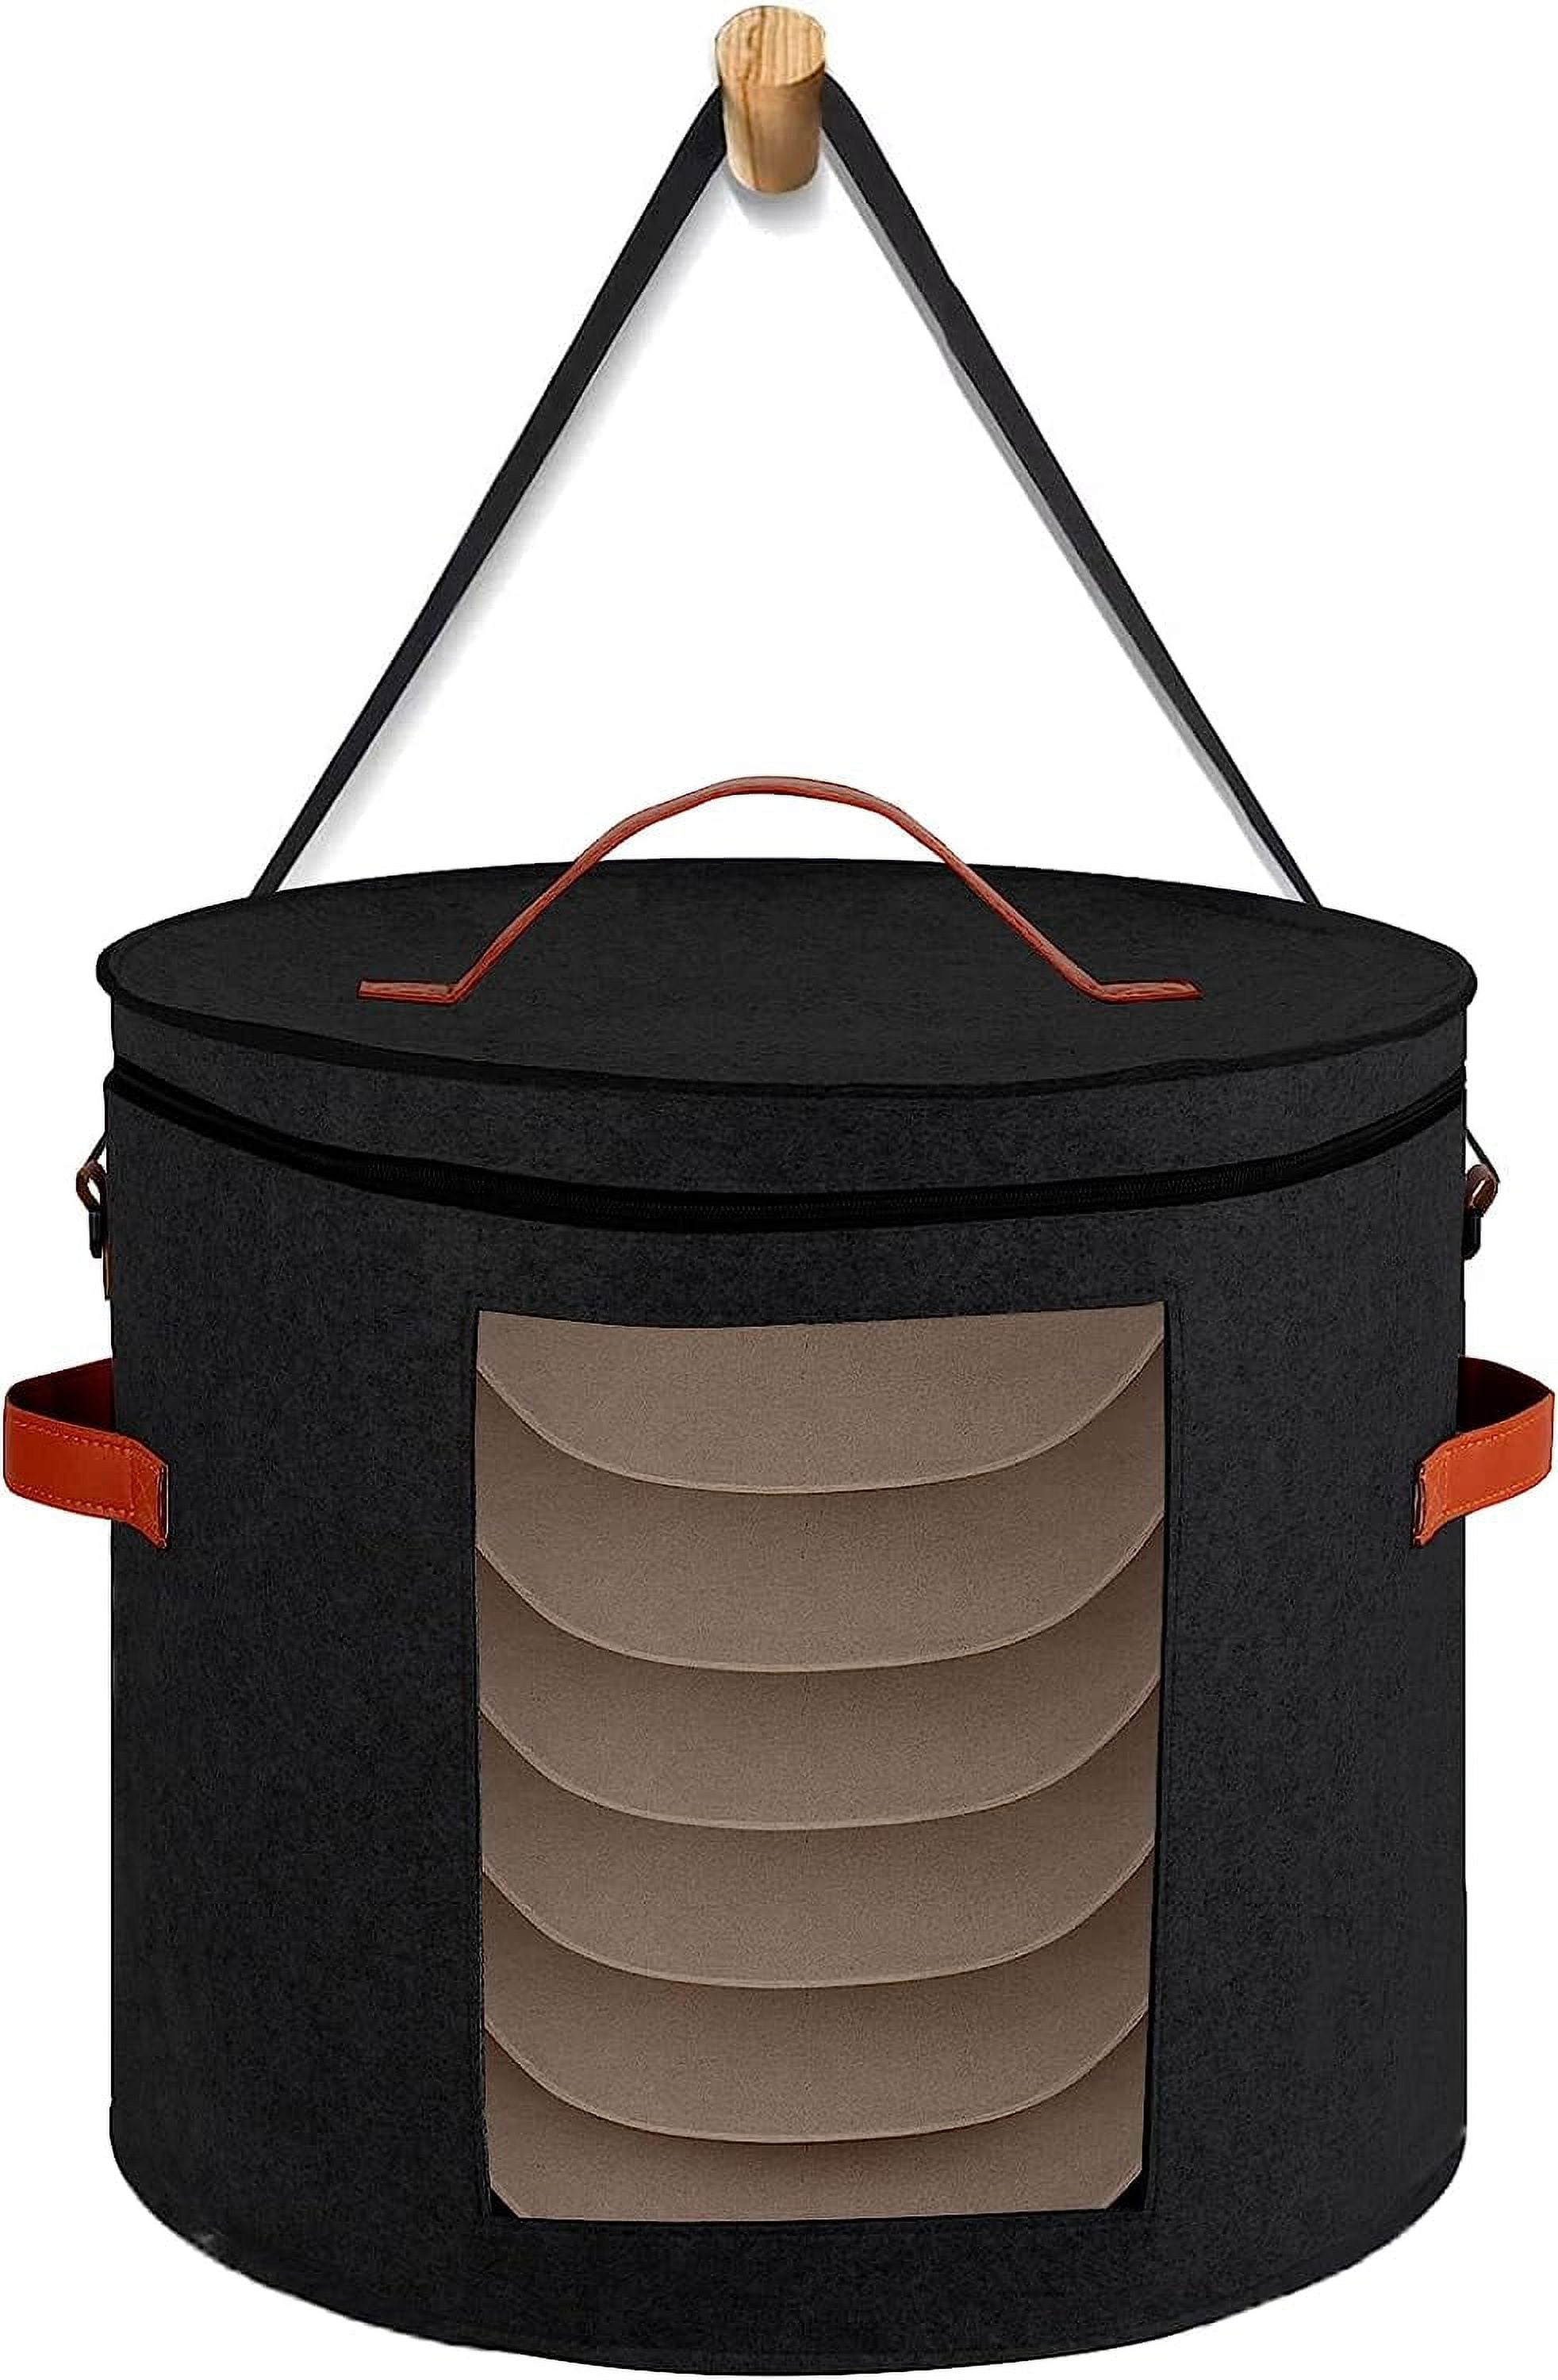 Dynamic Hat Box for Travel and Storage - Collapsible Design with 4 Stabilizing Rods for Added Support - Hat Boxes for Women and Men - Versatile Hat